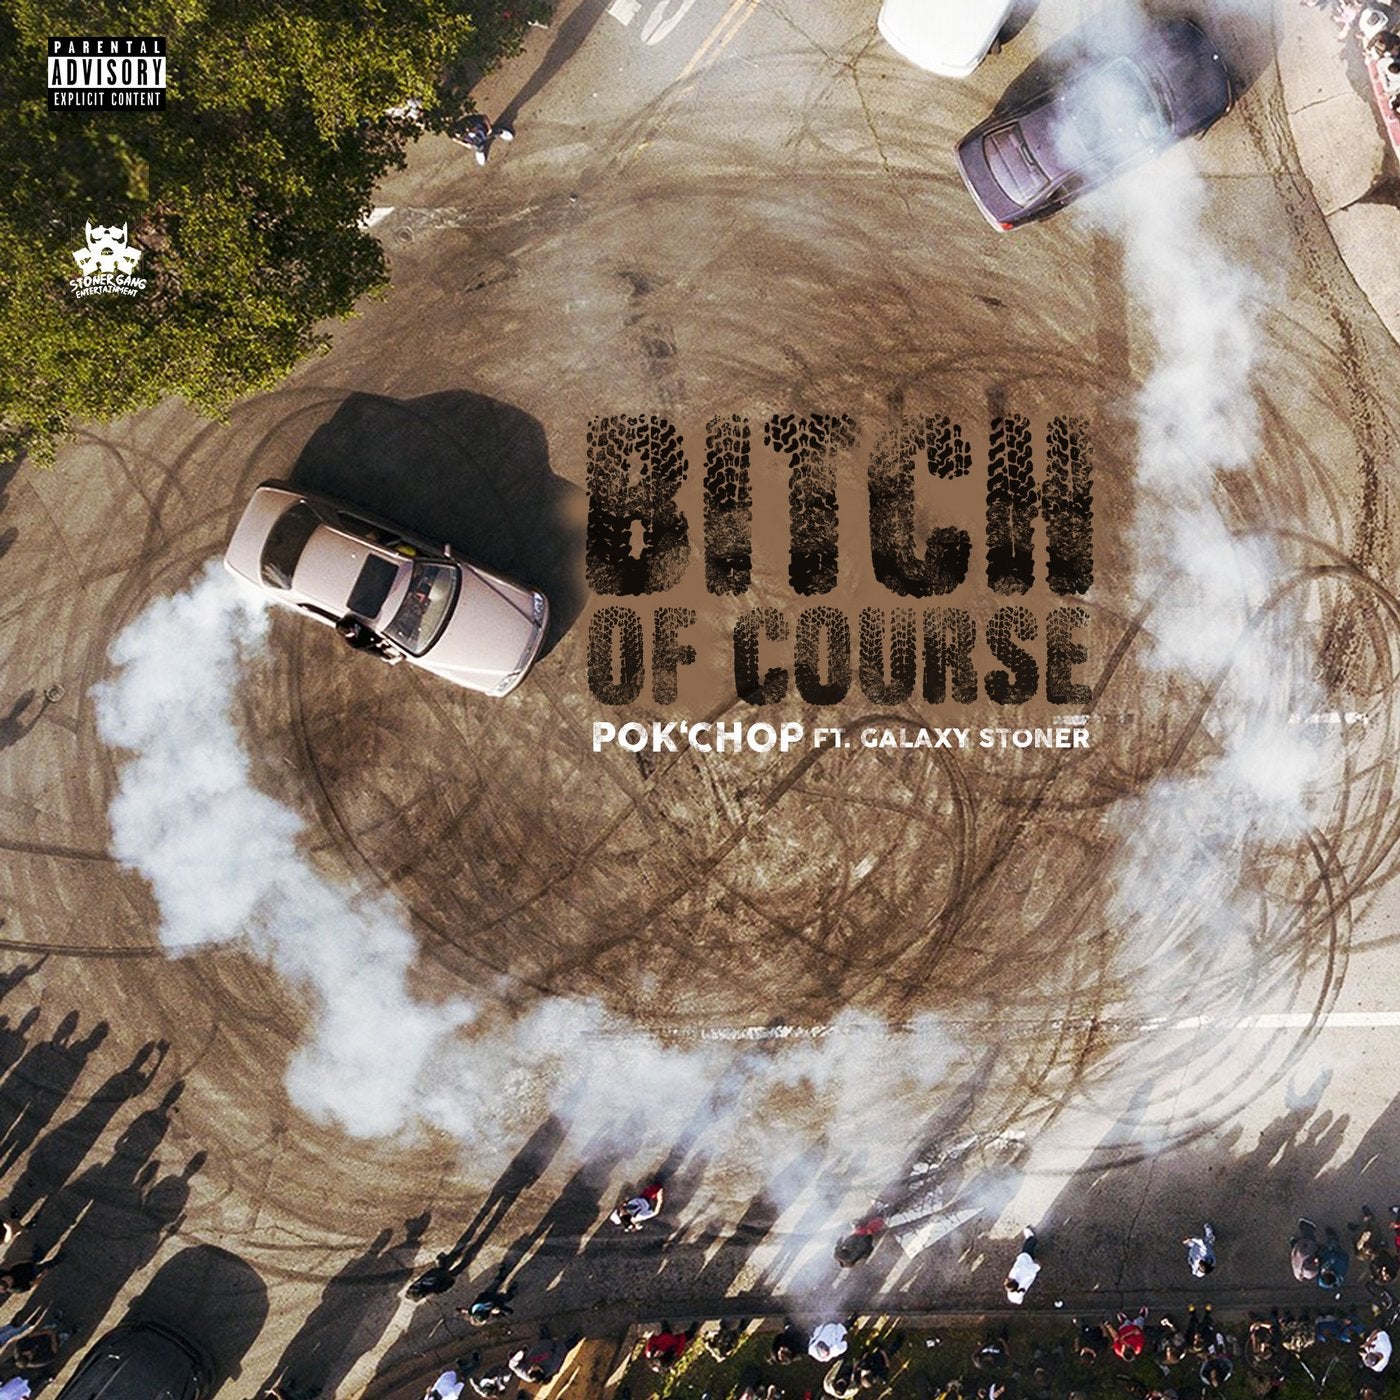 Bitch Of Course (feat. Galaxy Stoner)